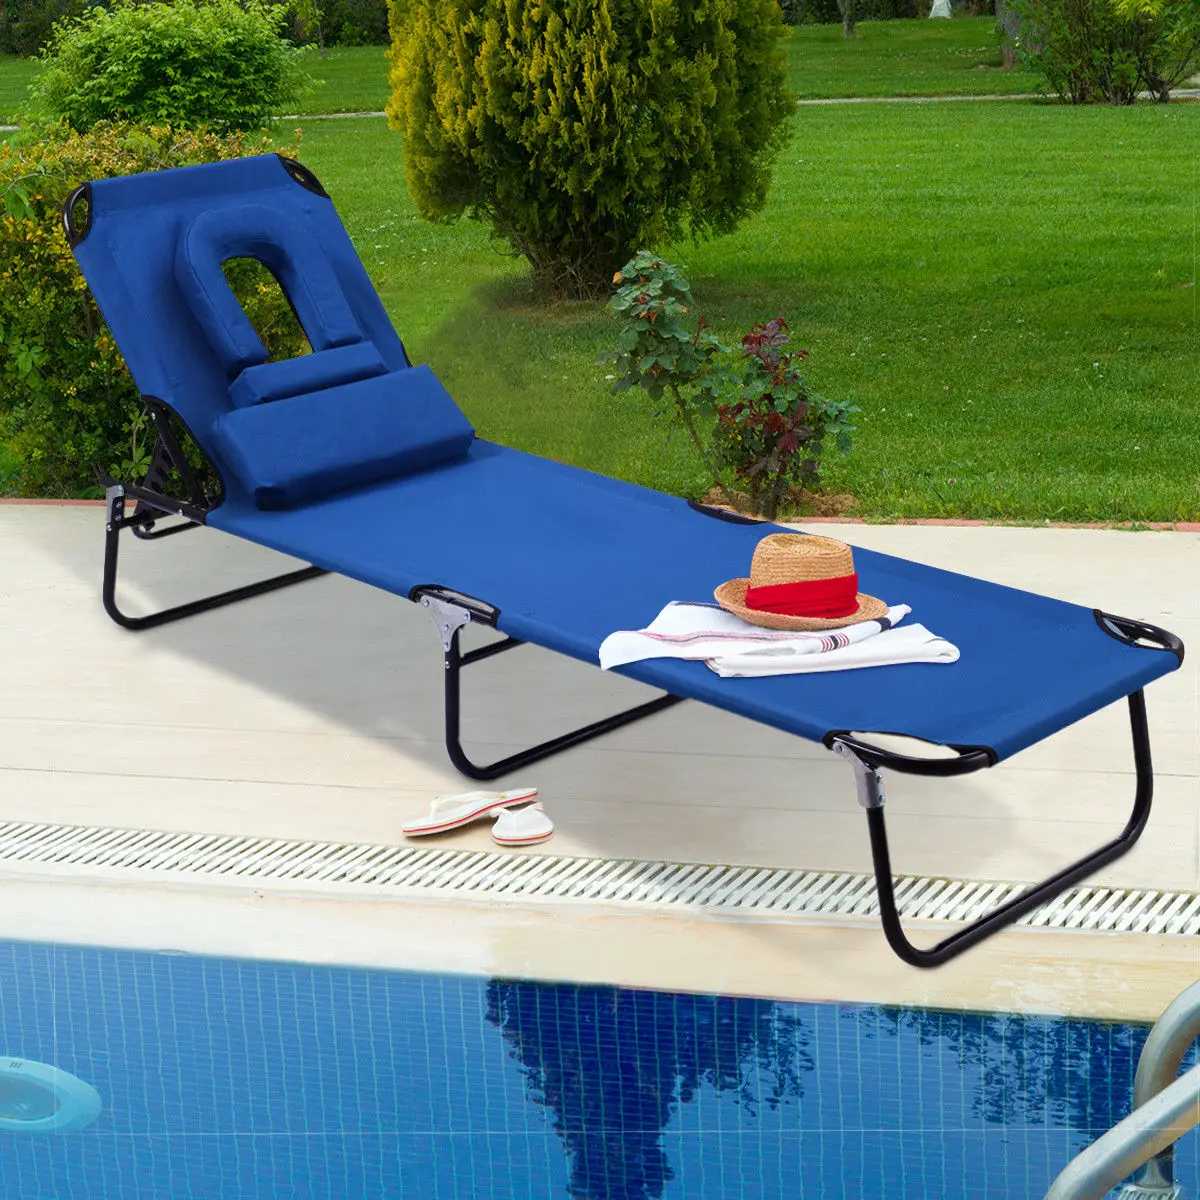 Foldable Lounge Chair Lawn Chaise Lightweight Camping Recliner Patio Chair Blue 